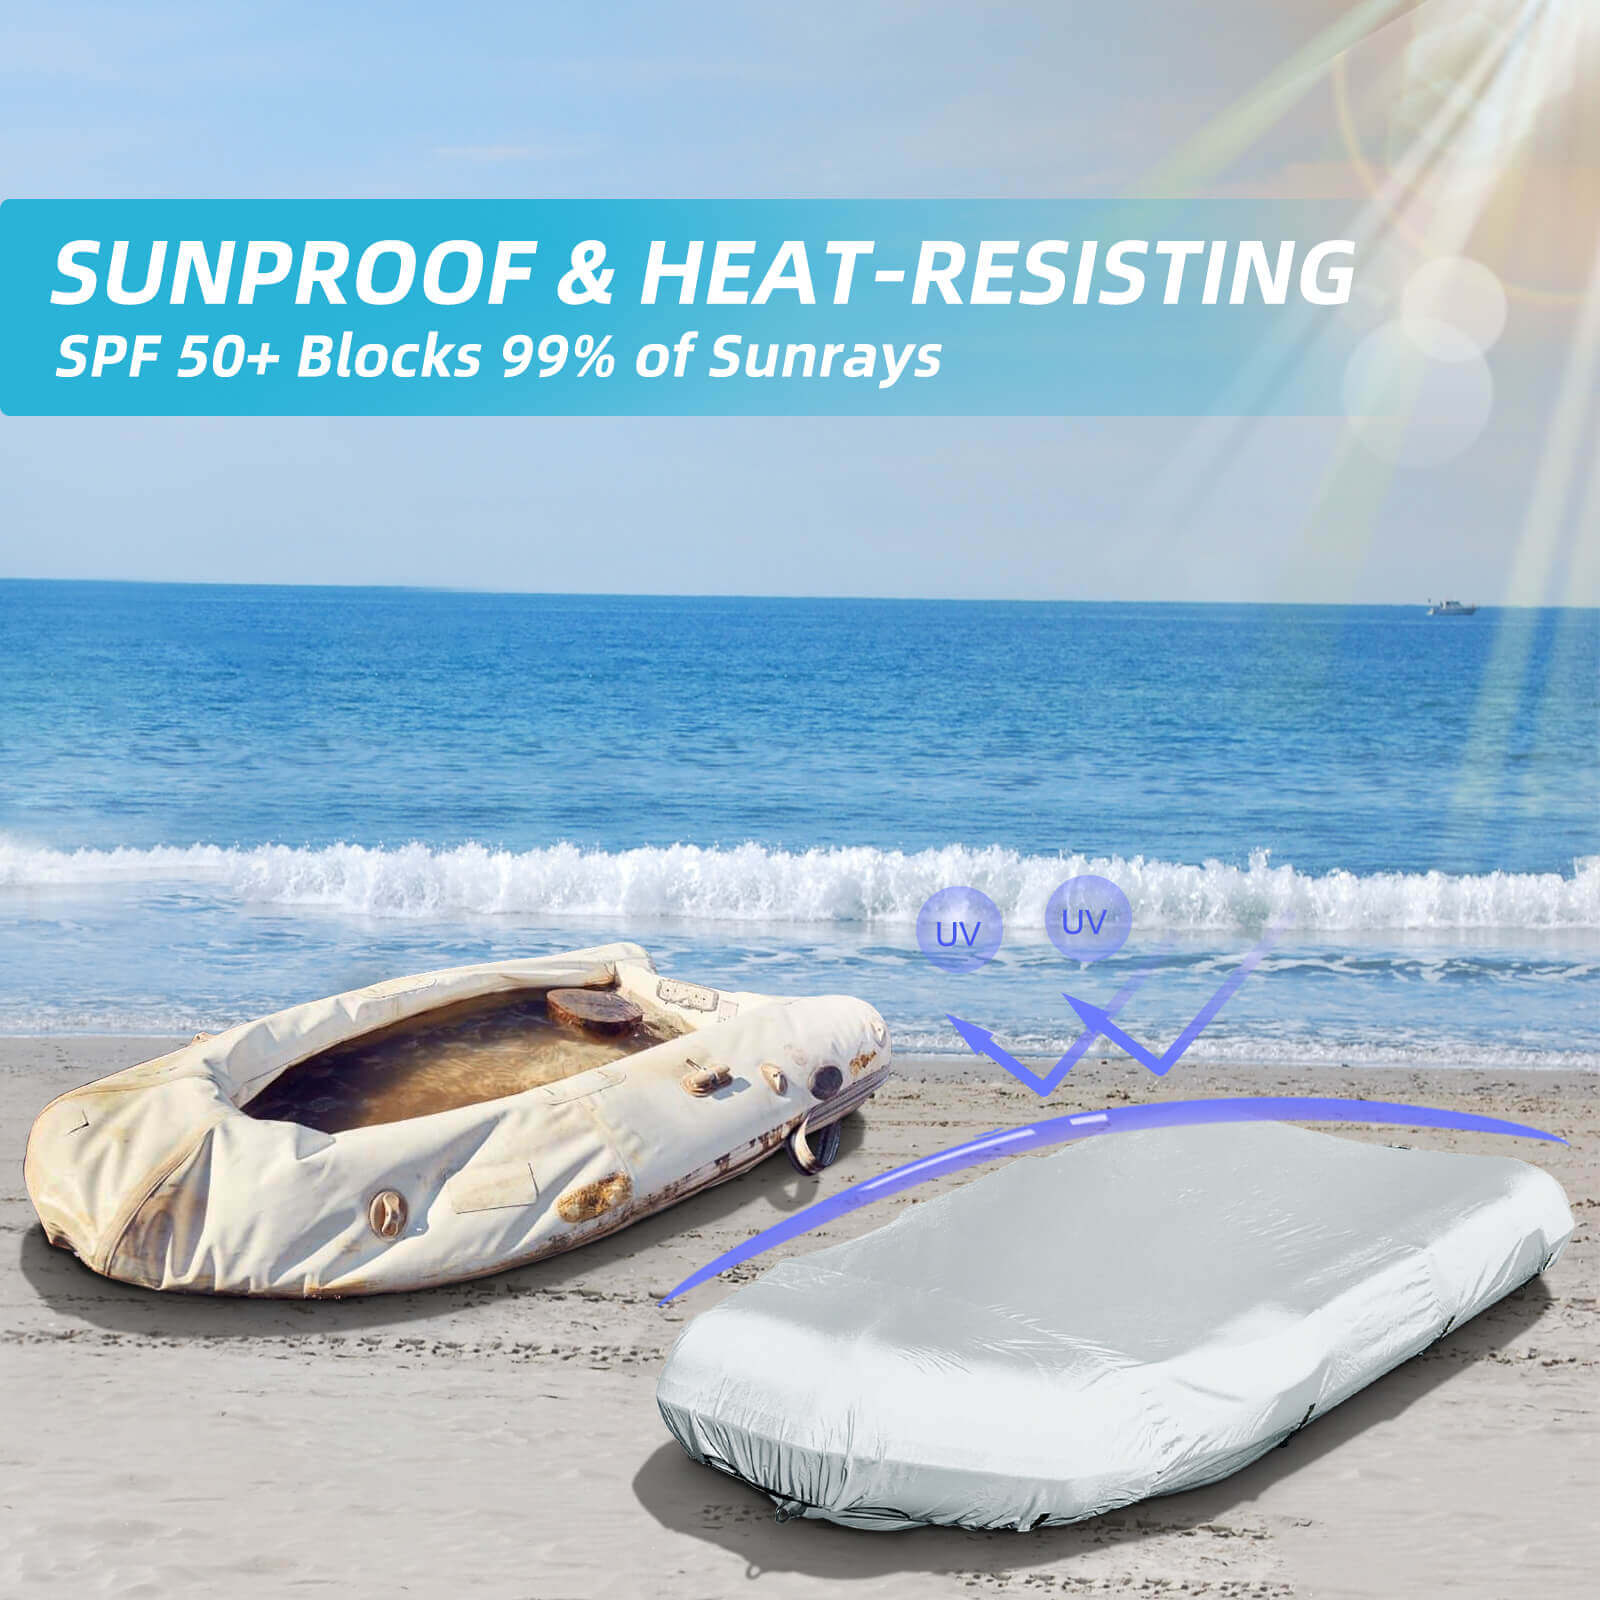 Dinghy Cover - sunproof&heat-resisting